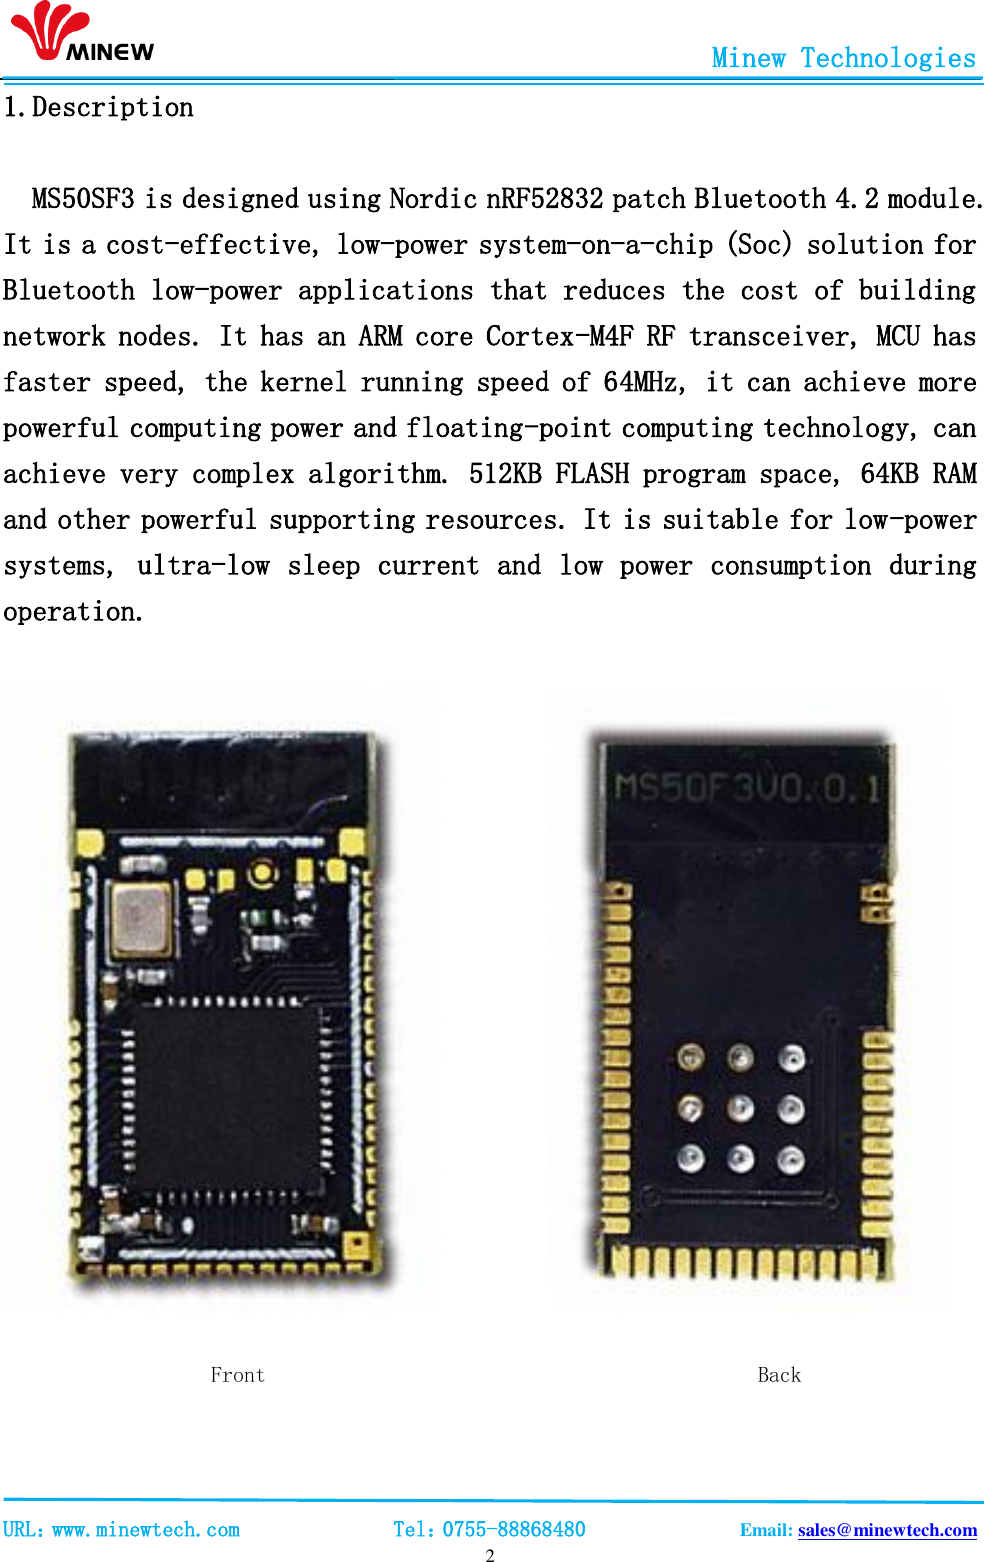                                                       Minew Technologies                                                                                             URL：www.minewtech.com              Tel：0755-88868480              Email: sales@minewtech.com   2 1.Description  MS50SF3 is designed using Nordic nRF52832 patch Bluetooth 4.2 module. It is a cost-effective, low-power system-on-a-chip (Soc) solution for Bluetooth low-power applications that reduces the cost of building network nodes. It has an ARM core Cortex-M4F RF transceiver, MCU has faster speed, the kernel running speed of 64MHz, it can achieve more powerful computing power and floating-point computing technology, can achieve very complex algorithm. 512KB FLASH program space, 64KB RAM and other powerful supporting resources. It is suitable for low-power systems, ultra-low sleep current and low power consumption during operation.                                    Front                                             Back  